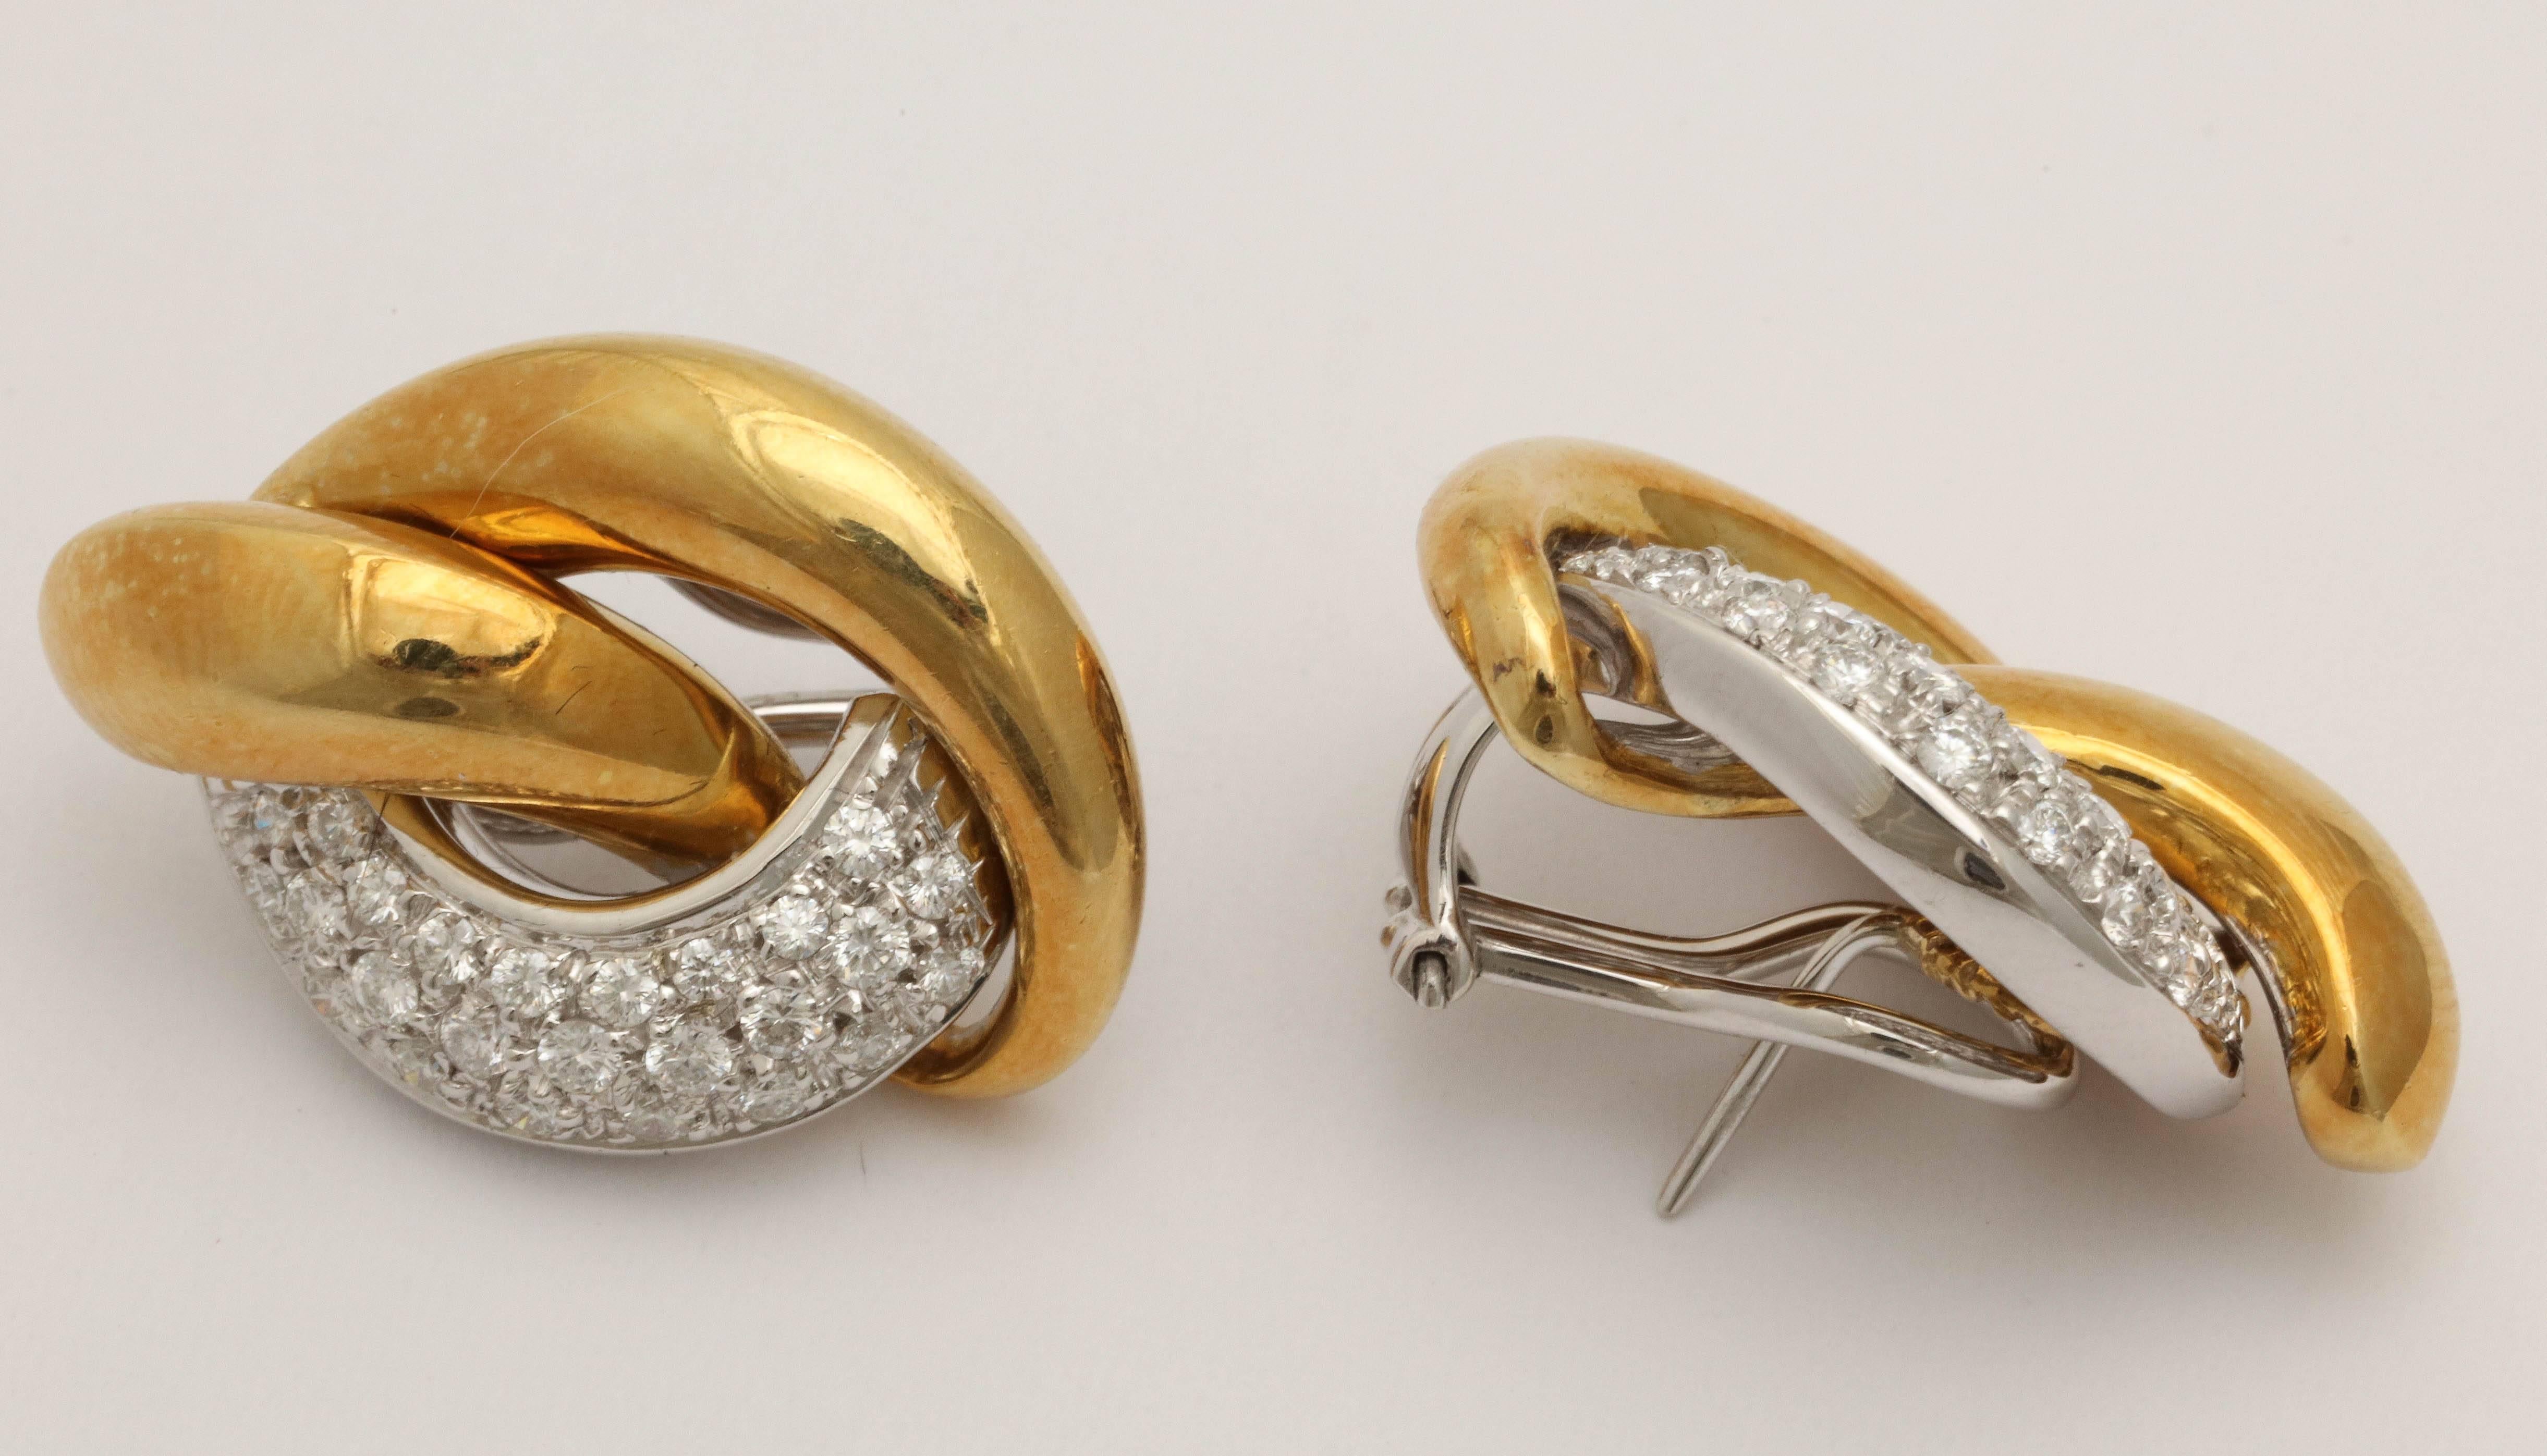 18kt Yellow Gold and Pave Diamonds Earrings.  Gold Hoops with a Pave Diamond Hoop making up an elegant Triad to embellish the Ear.  Ca. 1960.  Omega backs with a post for secure comfort.